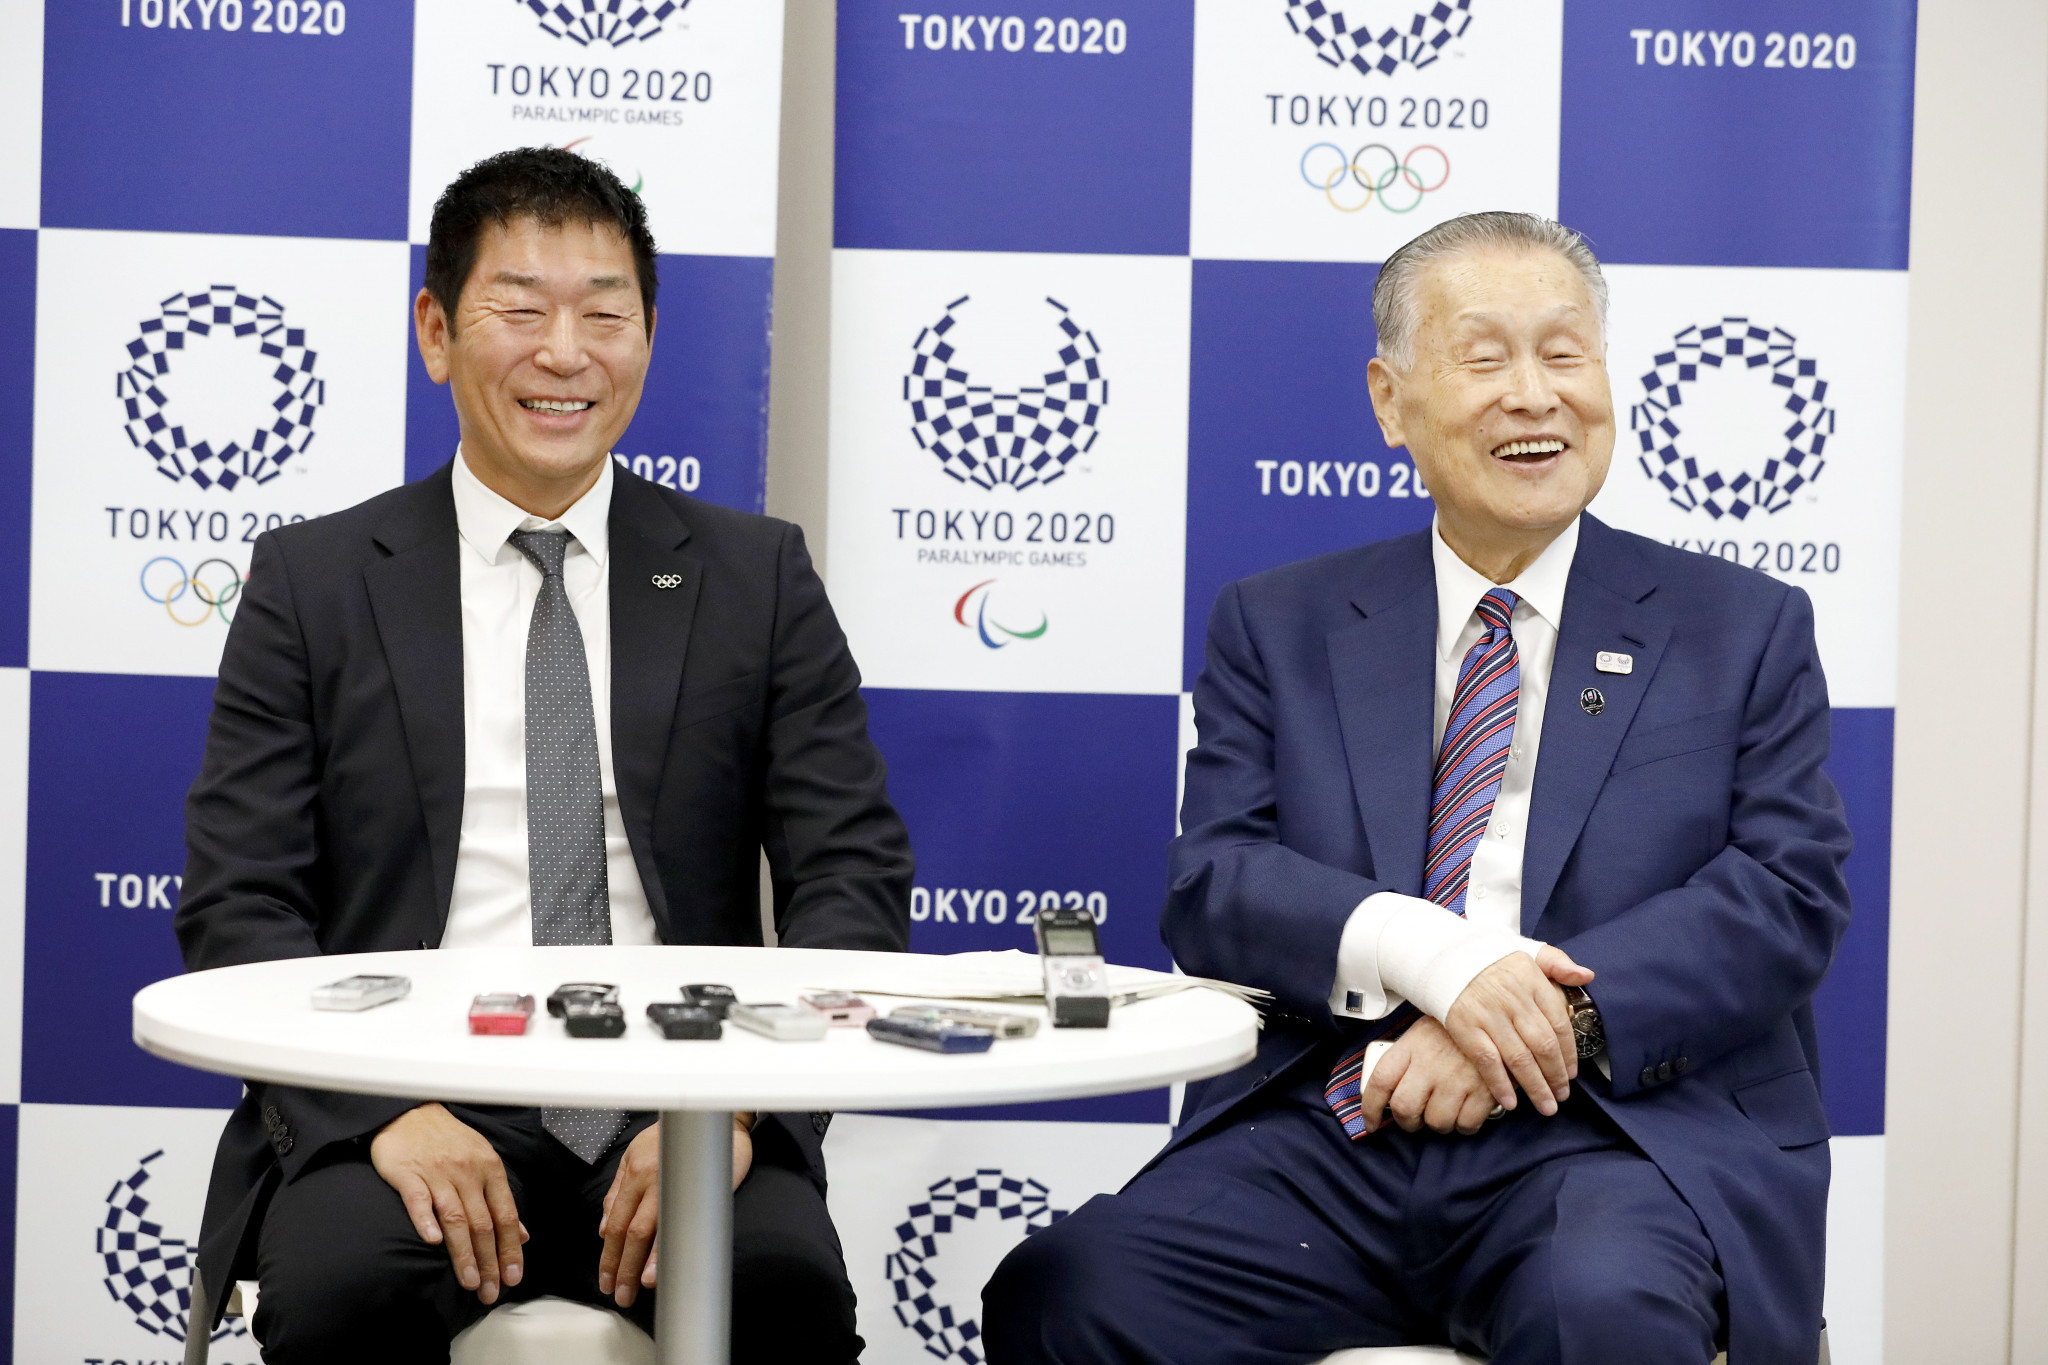 FIG President Watanabe to become Tokyo 2020 Executive Board member